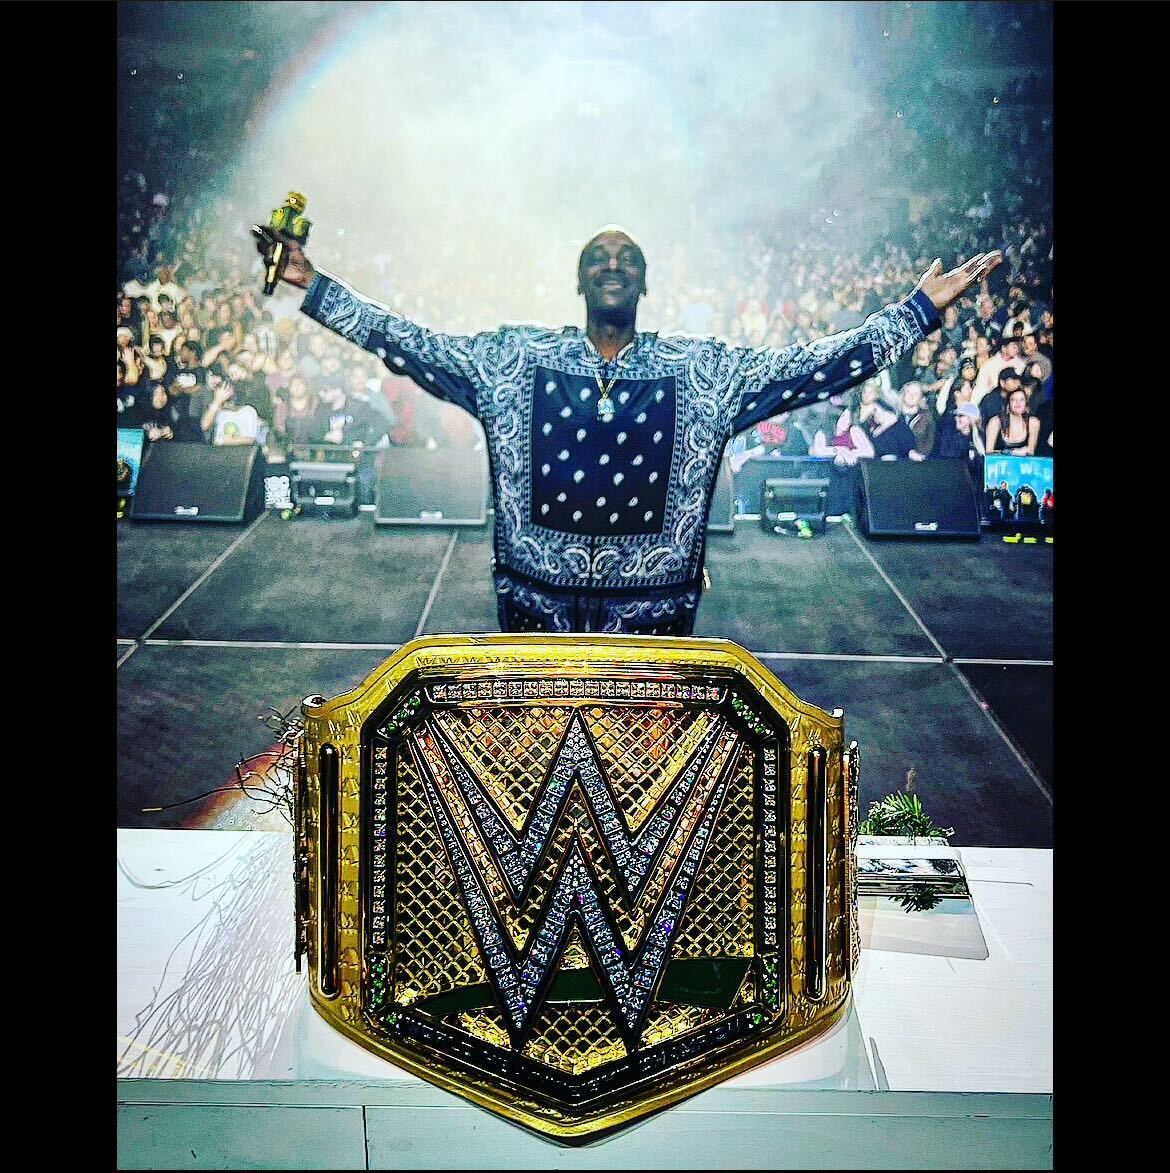 .@SnoopDogg brought his #WWEGoldenTitle on tour and now it's missing! If anybody sees it, let us know…